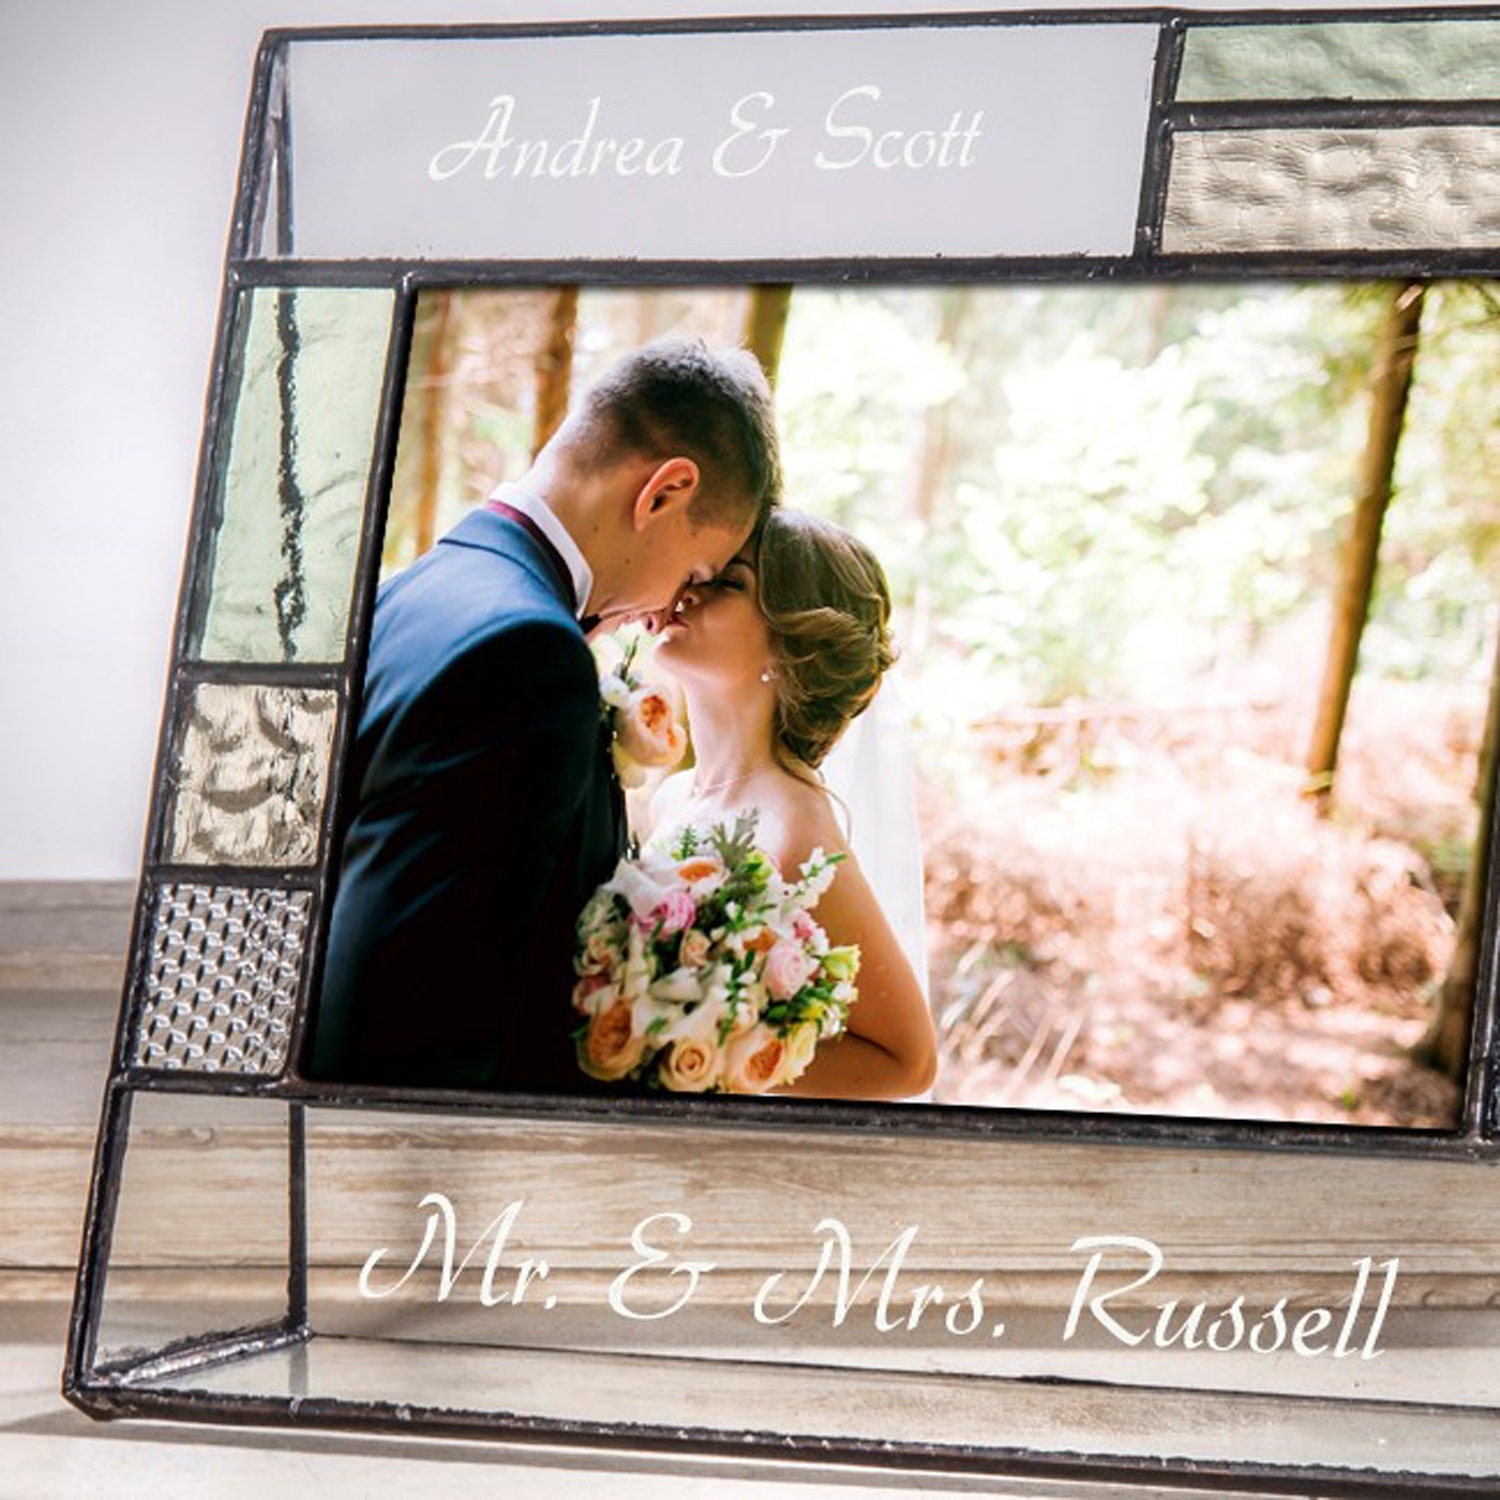  Wedding Money Gift Picture Frame, A5 Wooden Frame Money Gift  Holder for Bride and Groom, Creative Money Gift Idea for Wedding, Just  Married Wedding Photo Frame (Wedding-Just Married)